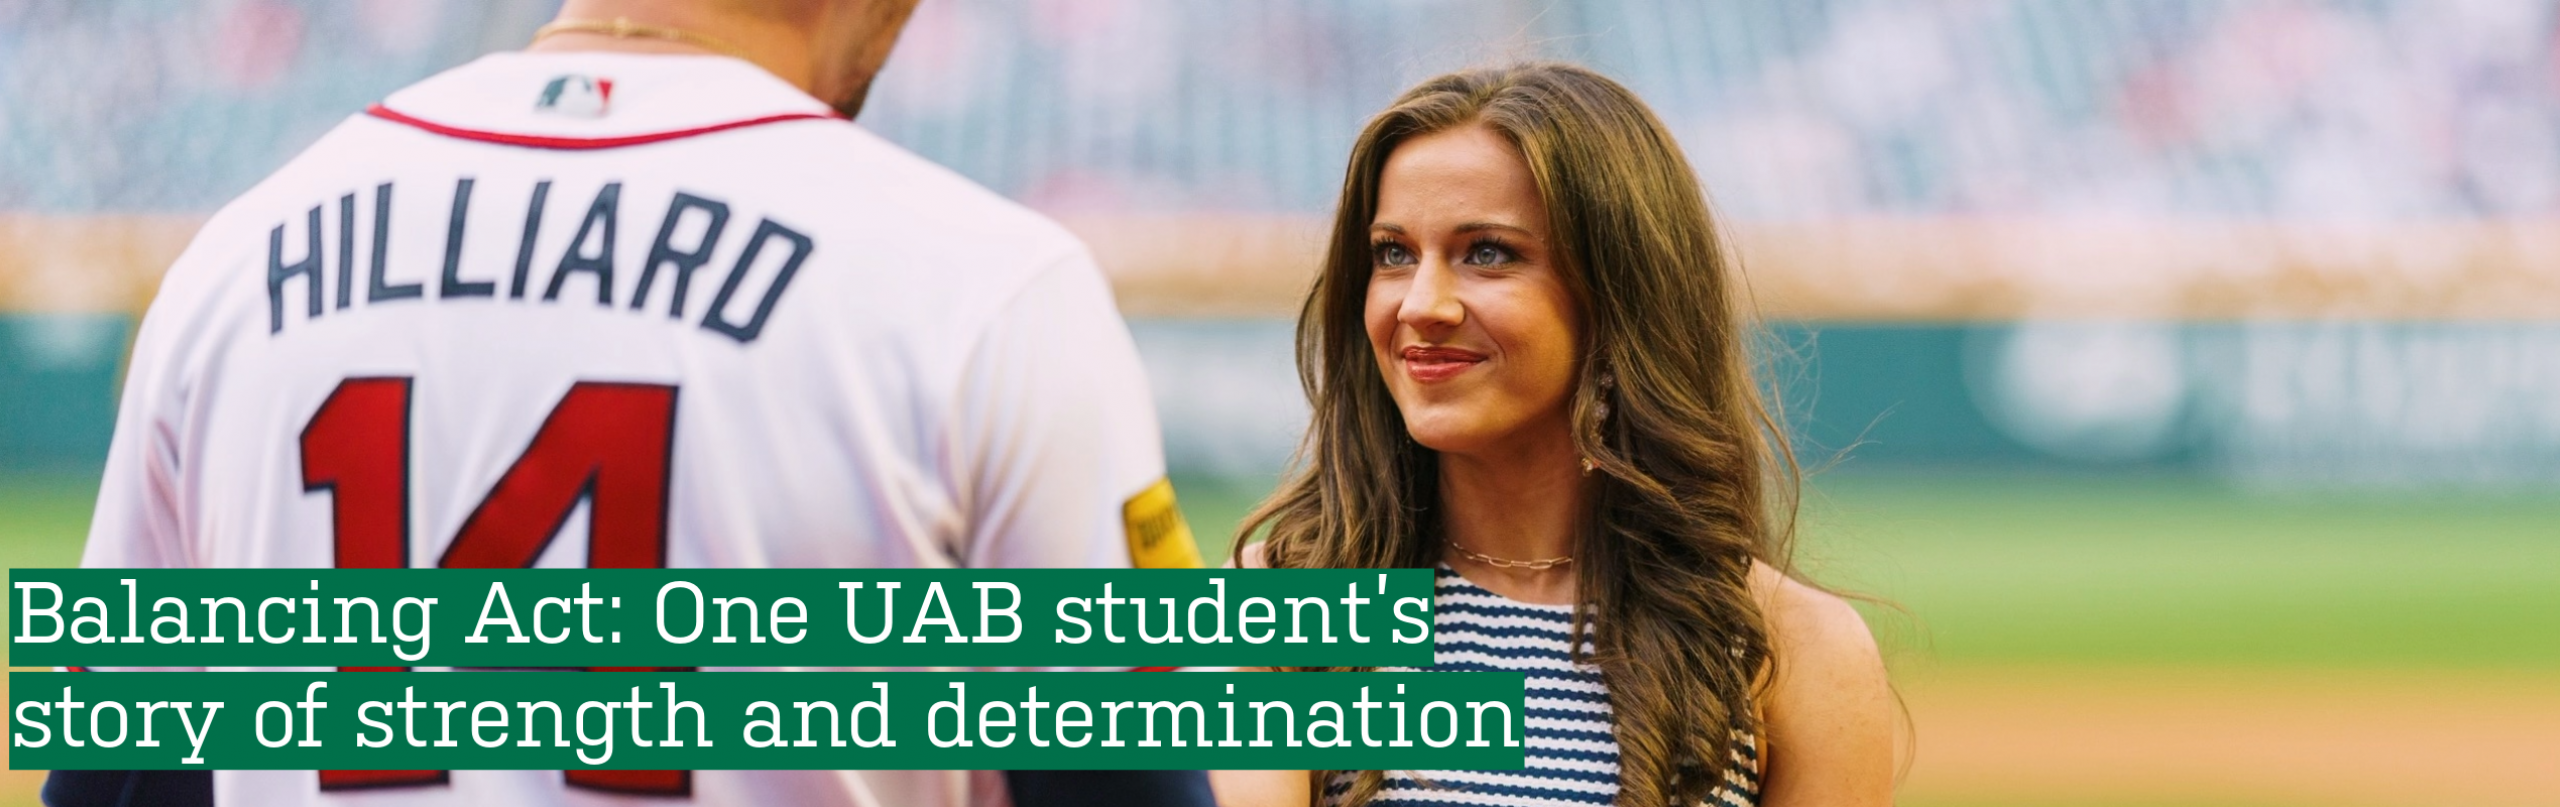 Zoe Champion: One UAB Student's Story of Strength and Determination